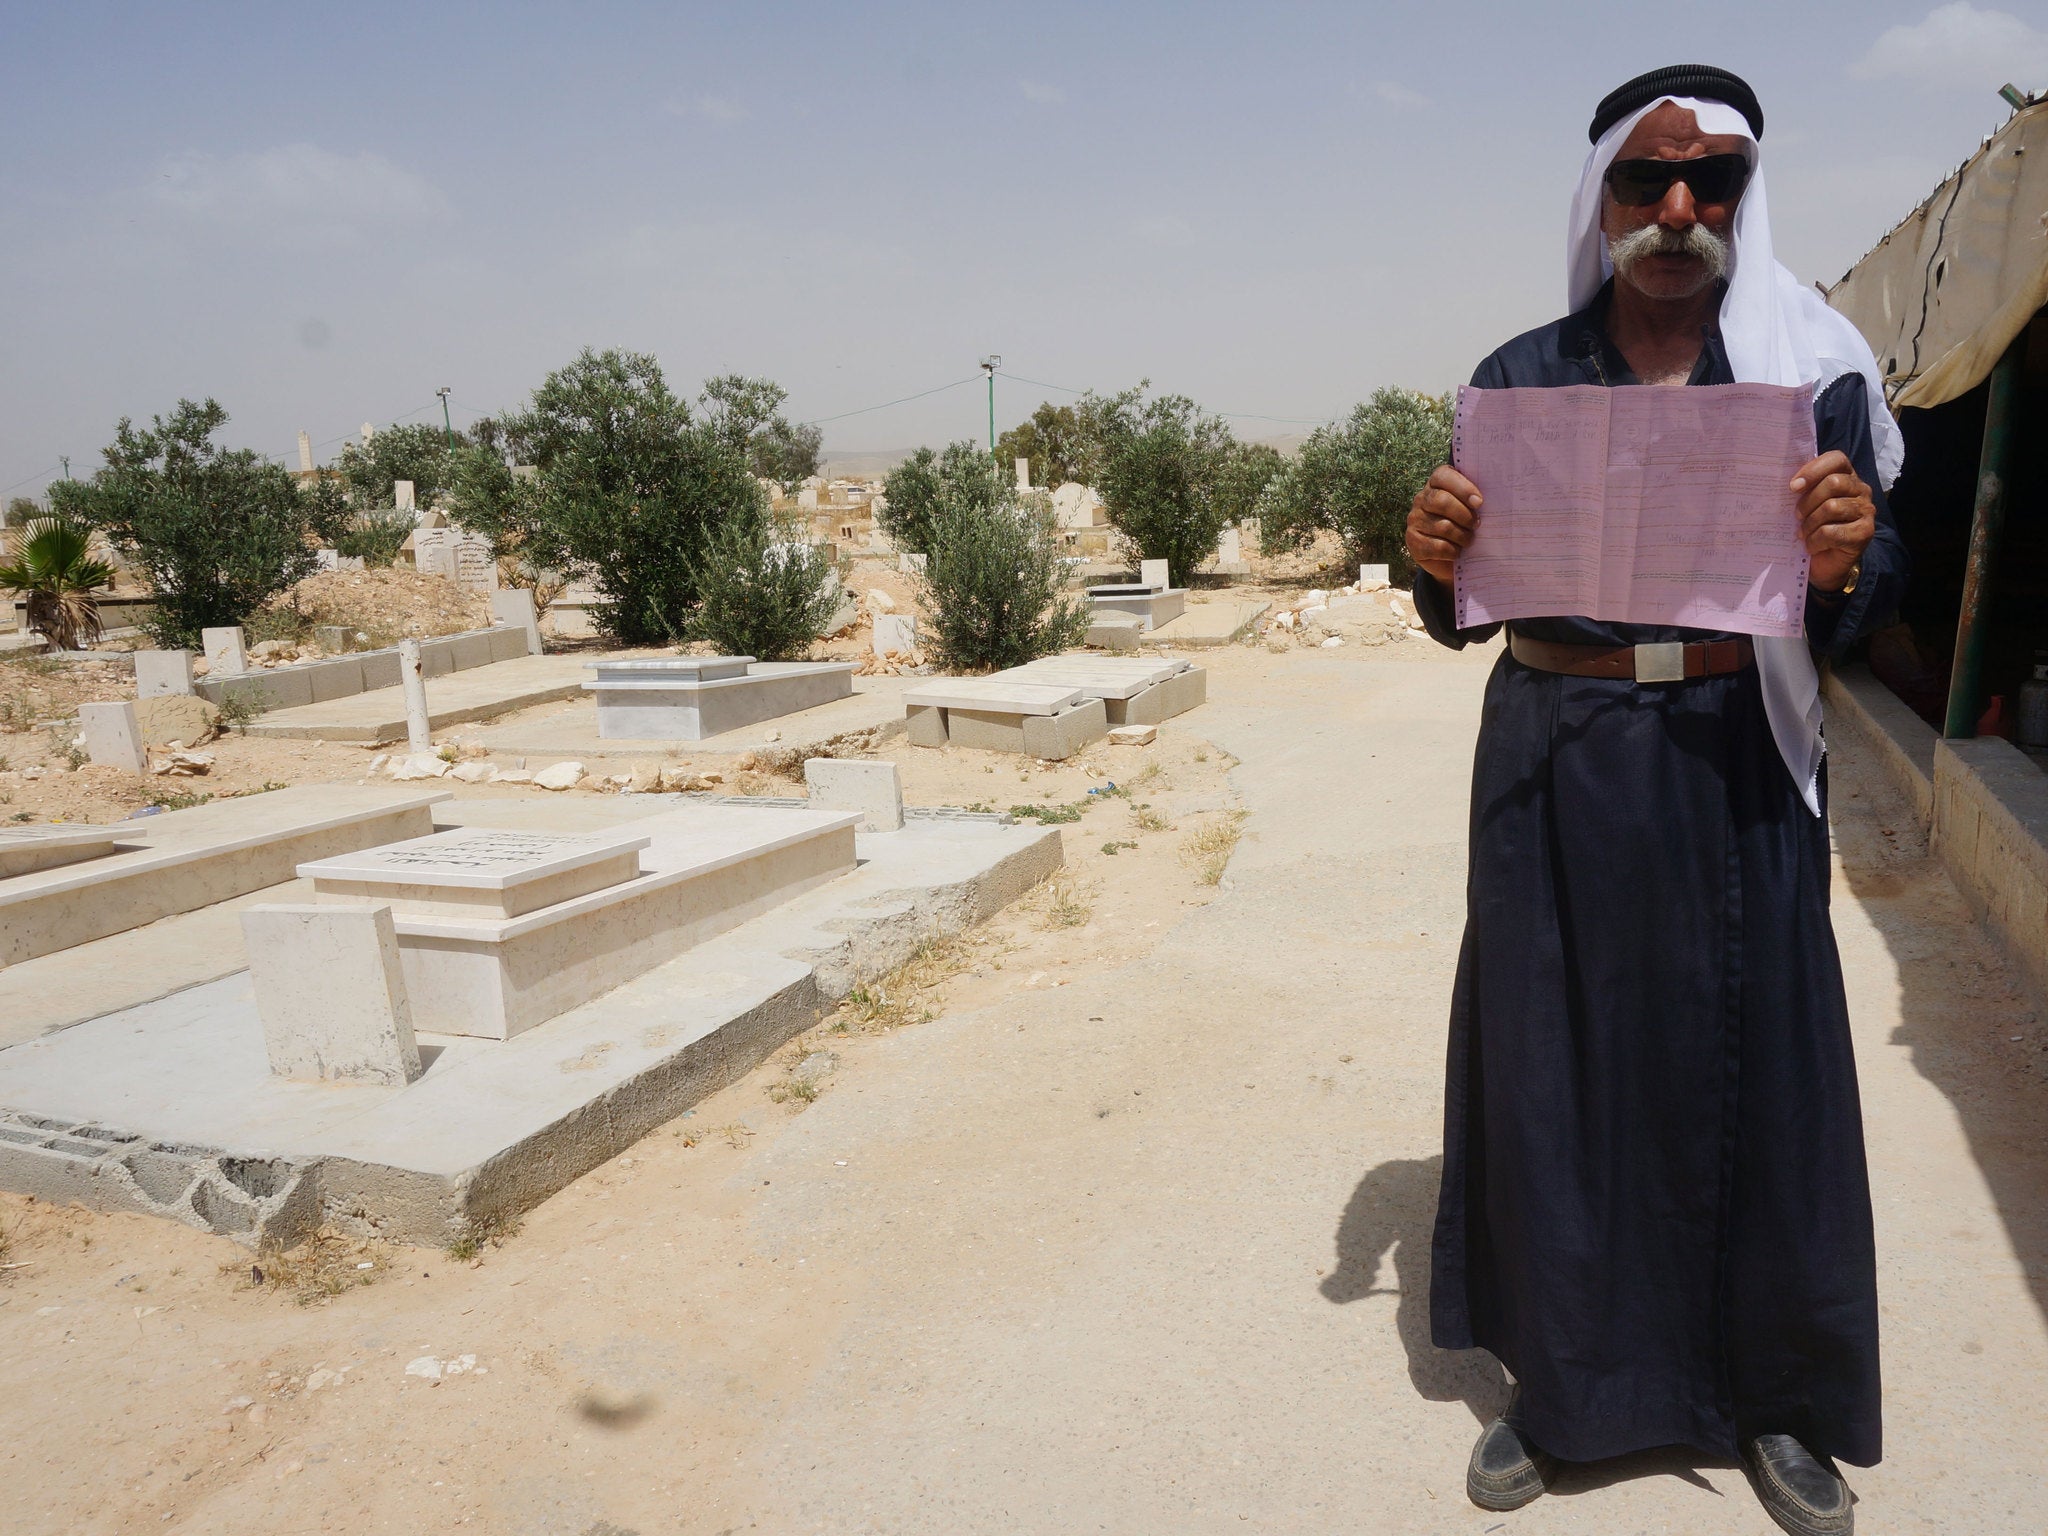 Sayach Al-Turi in the cemetery with his eviction order.